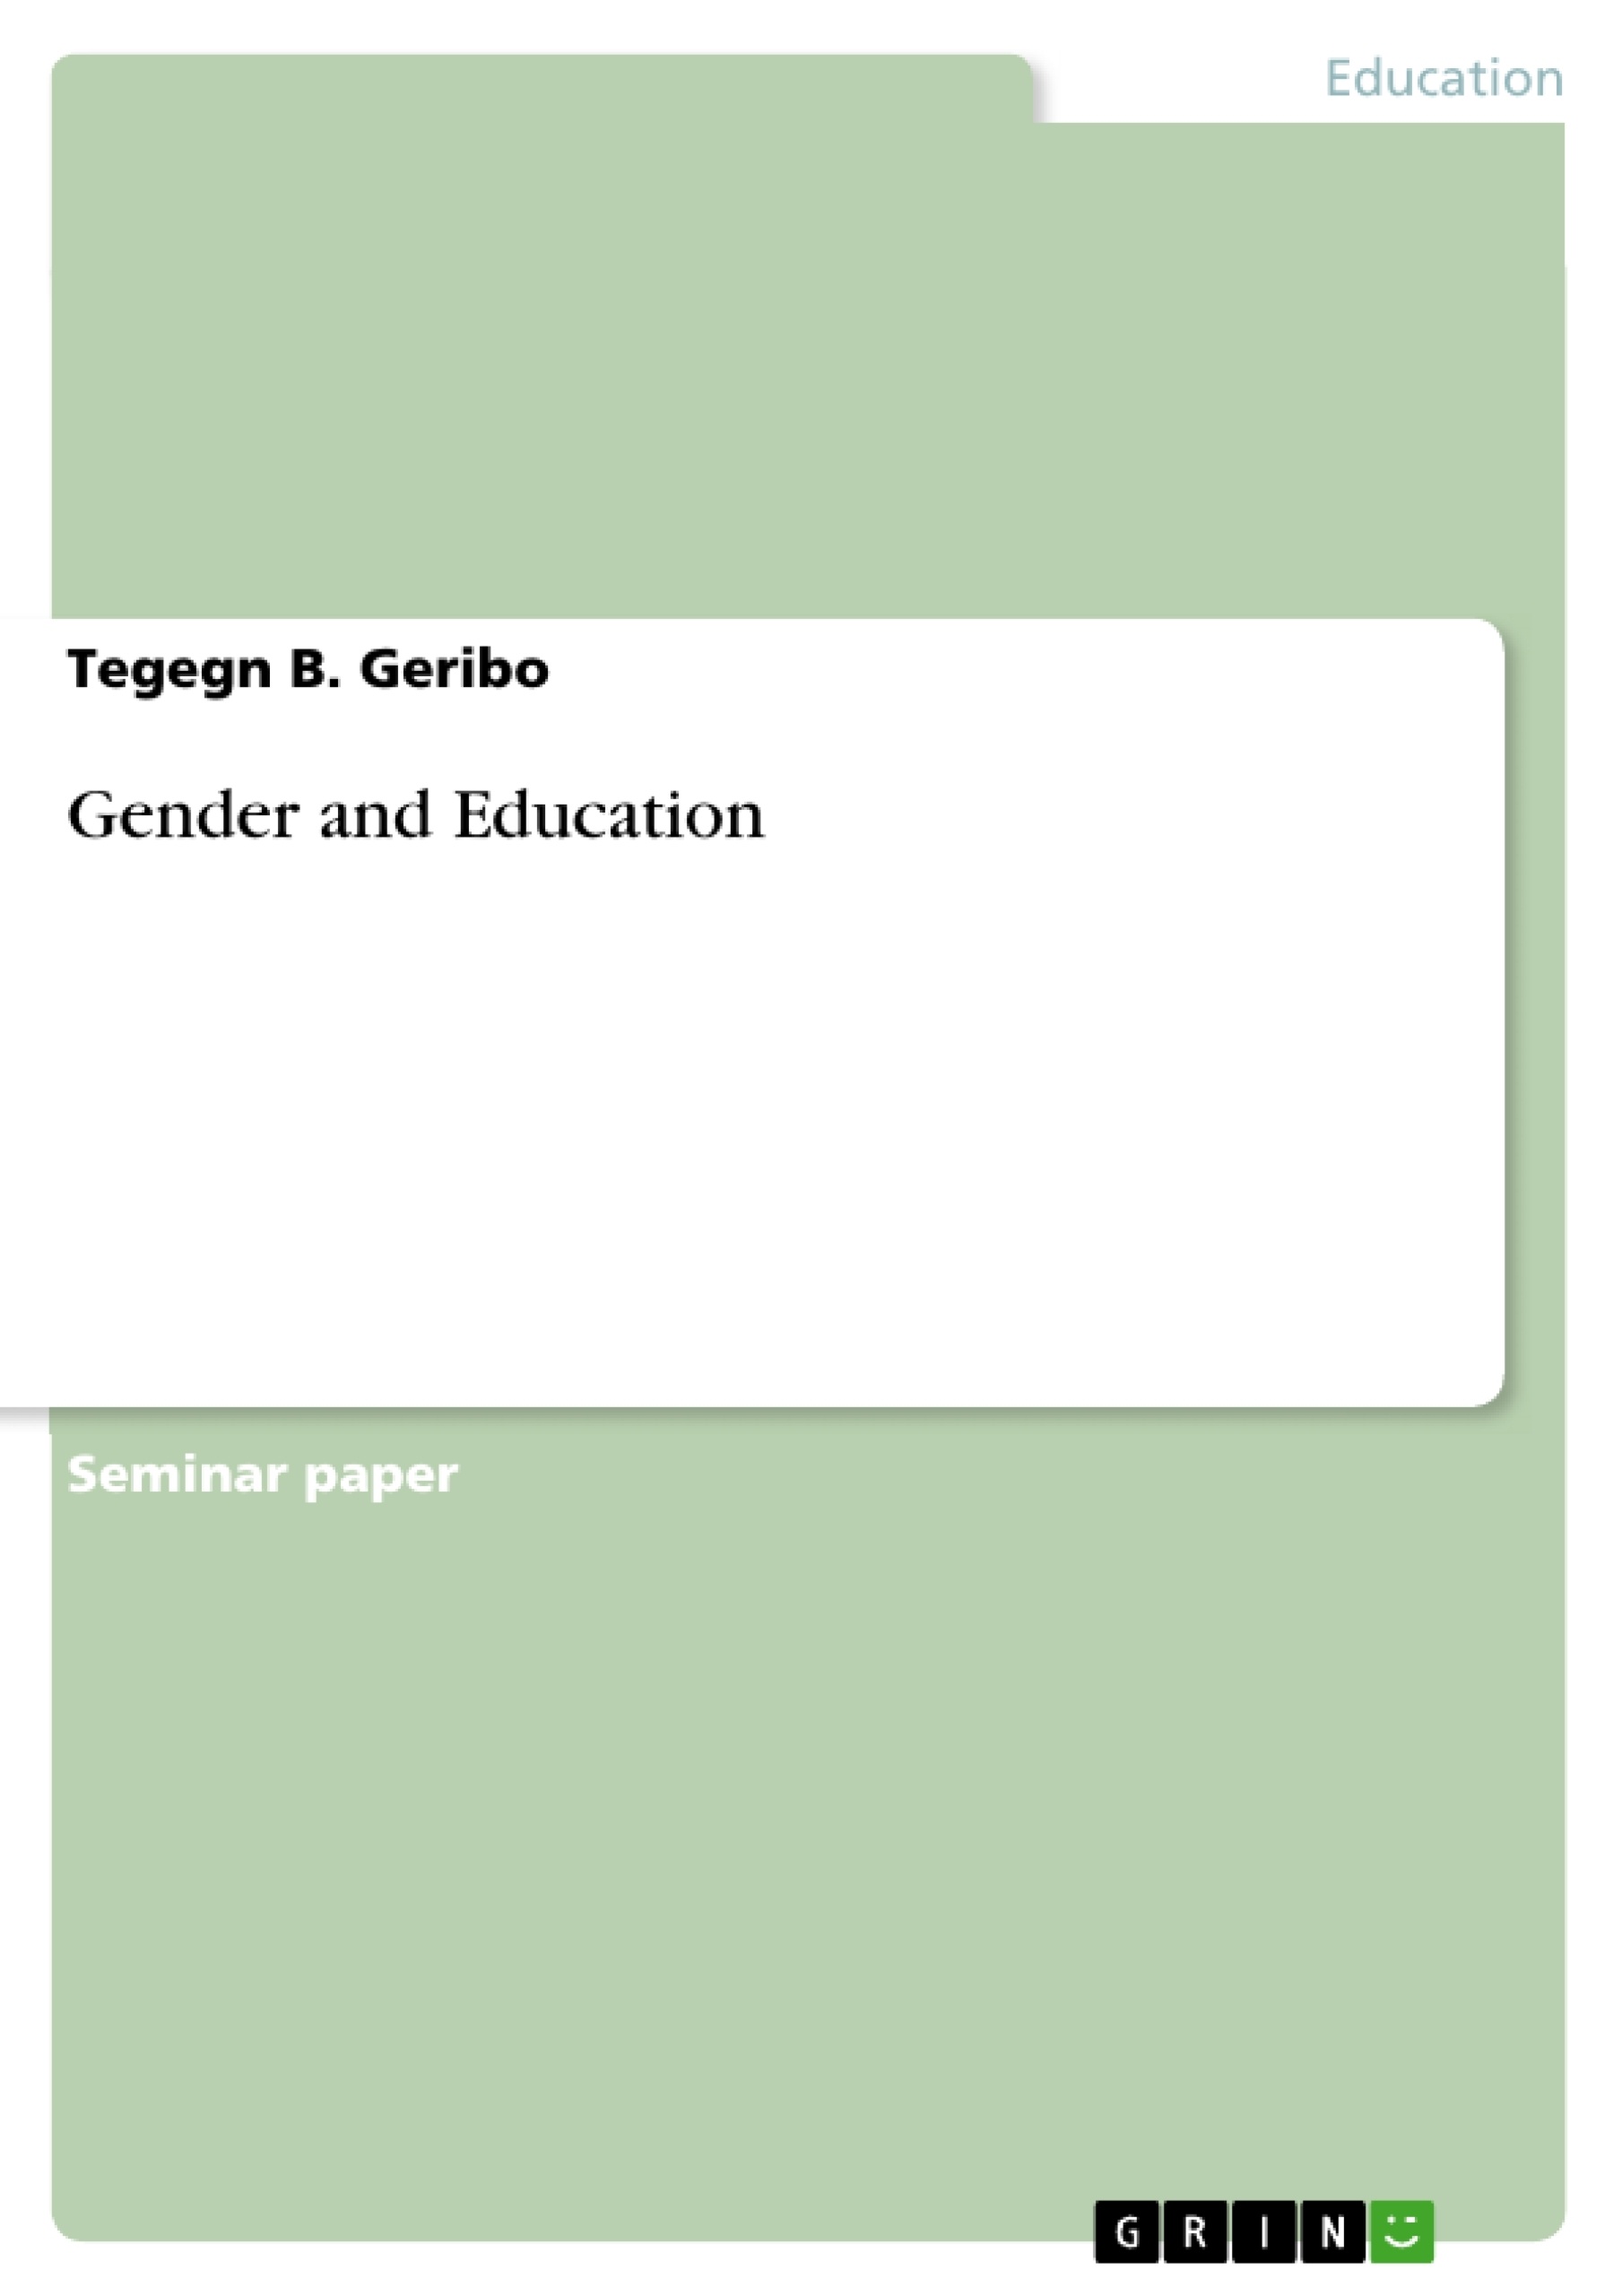 Title: Gender and Education  